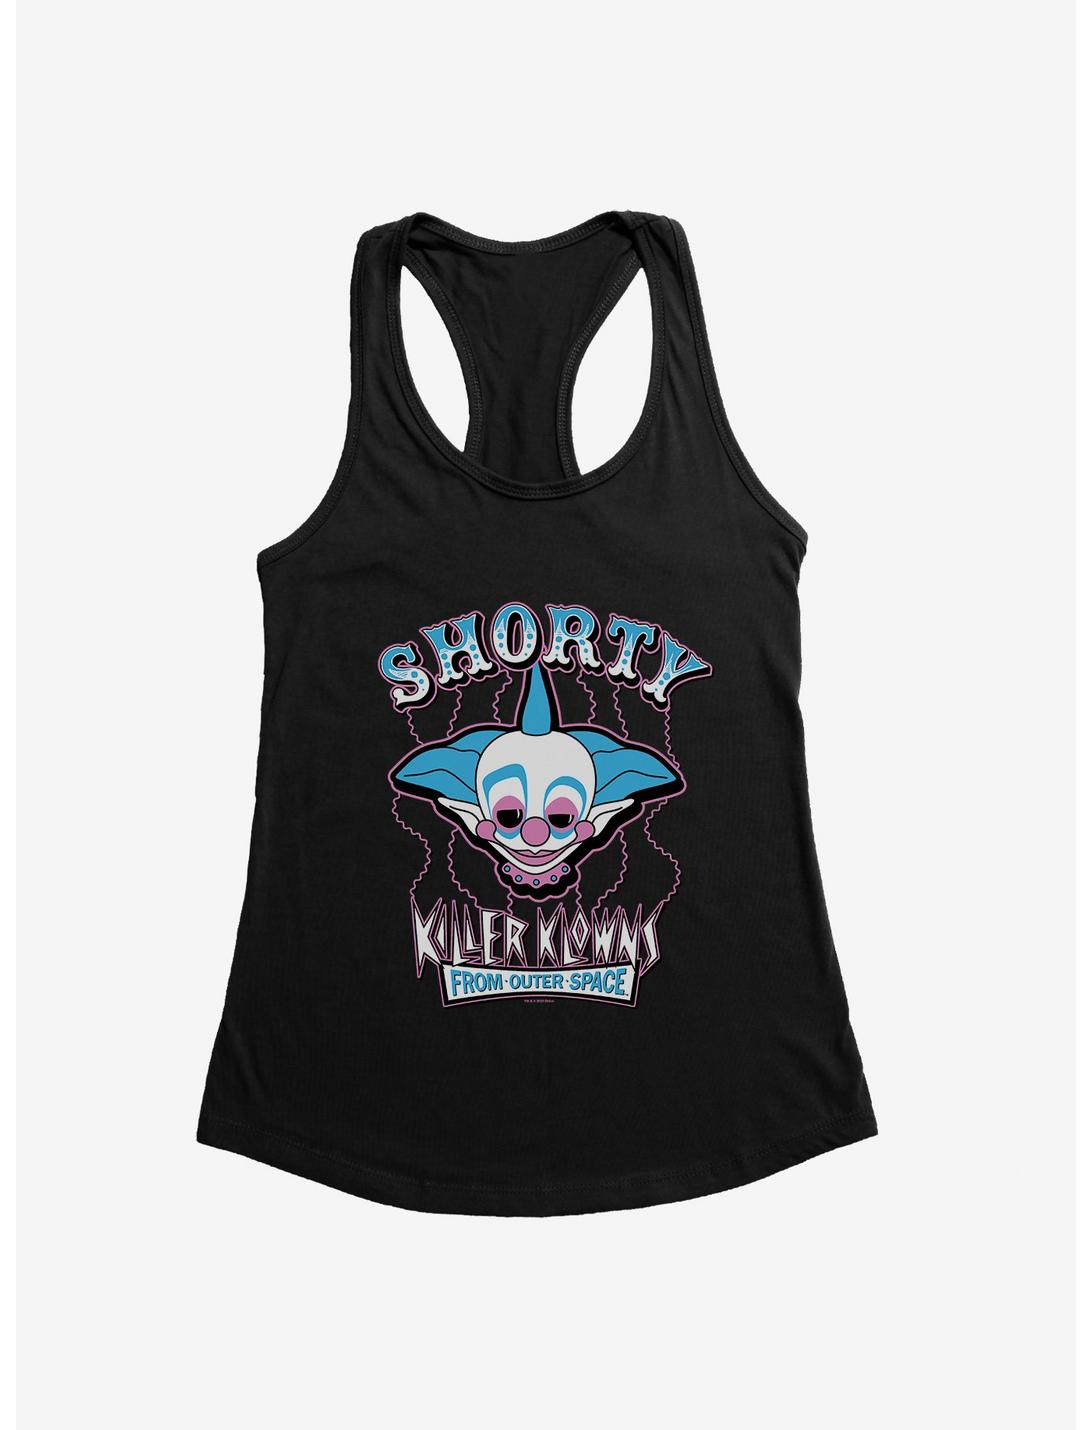 Killer Klowns From Outer Space Shorty Girls Tank, BLACK, hi-res